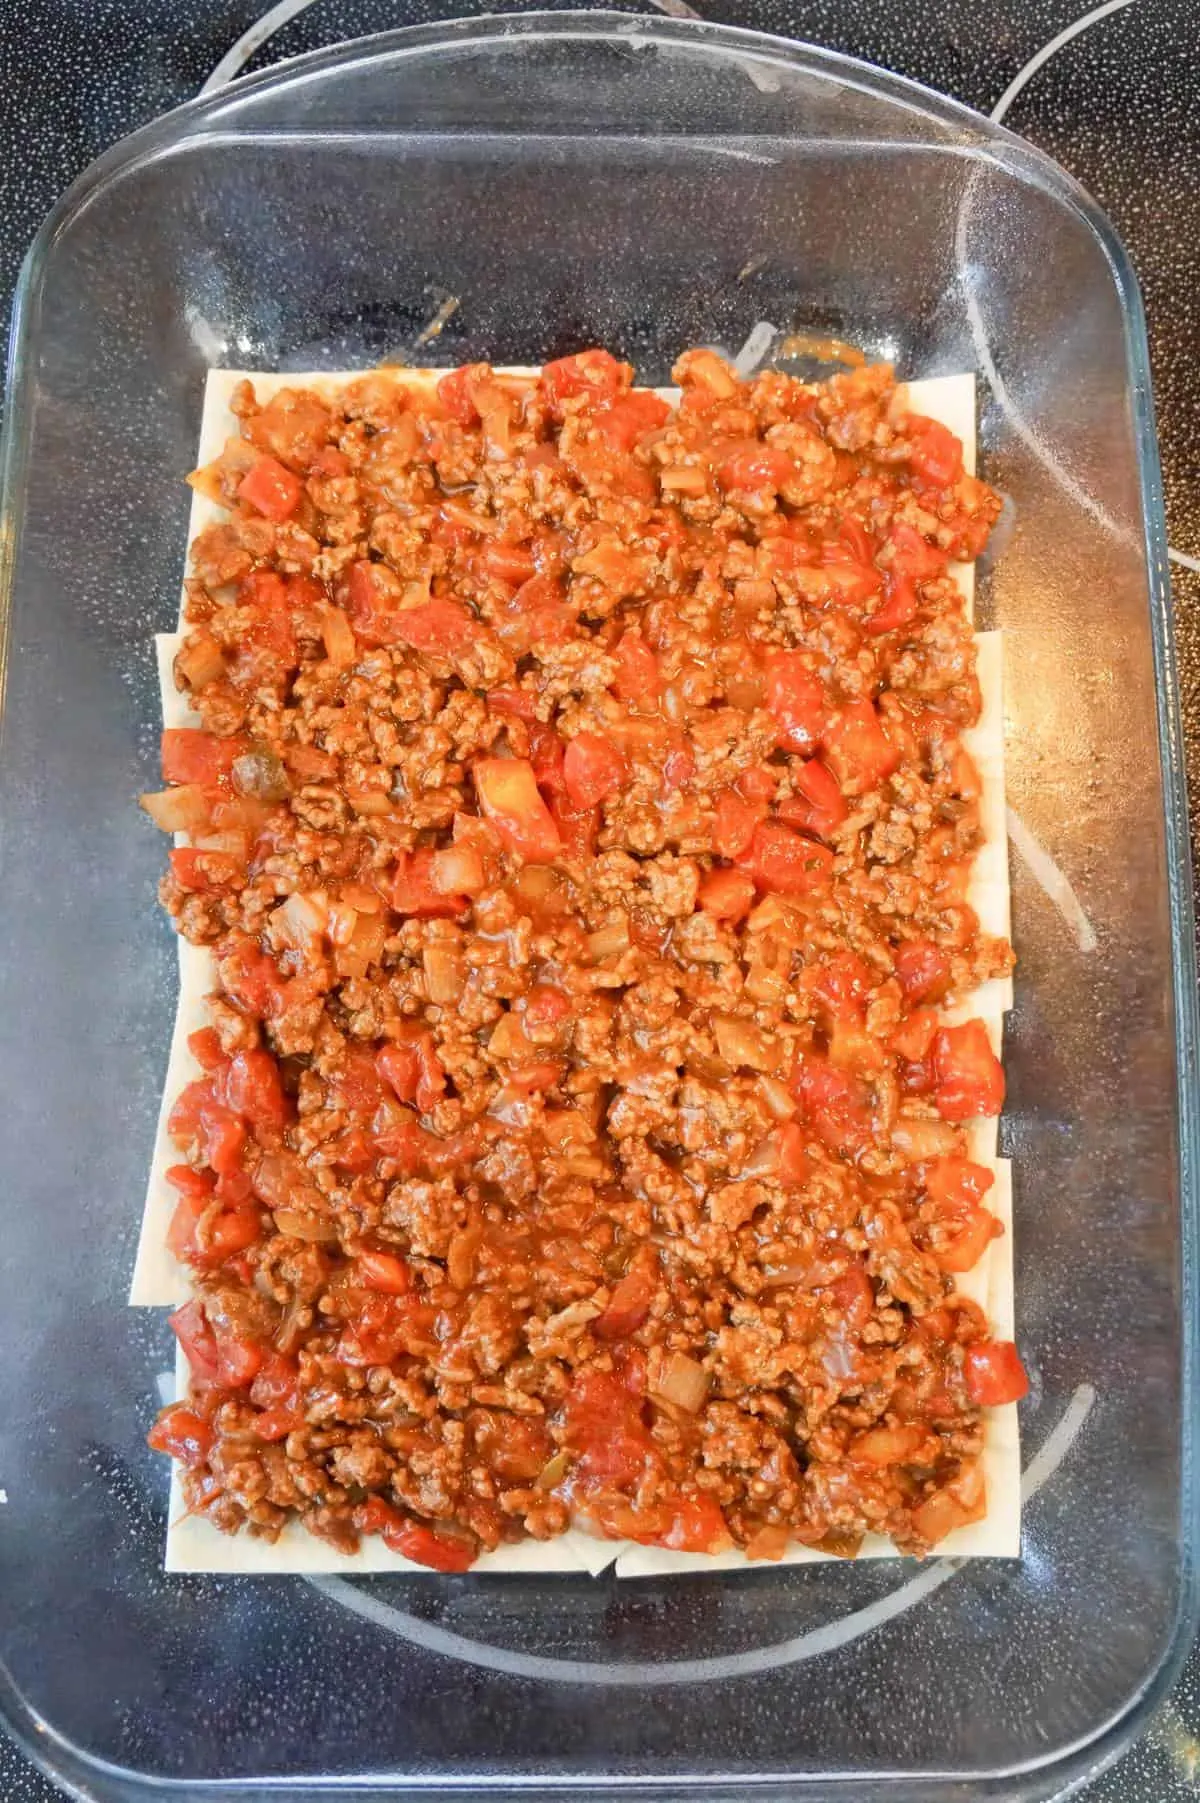 ground beef, salsa and Rotel mixture on top of flour tortilla pieces in a baking dish